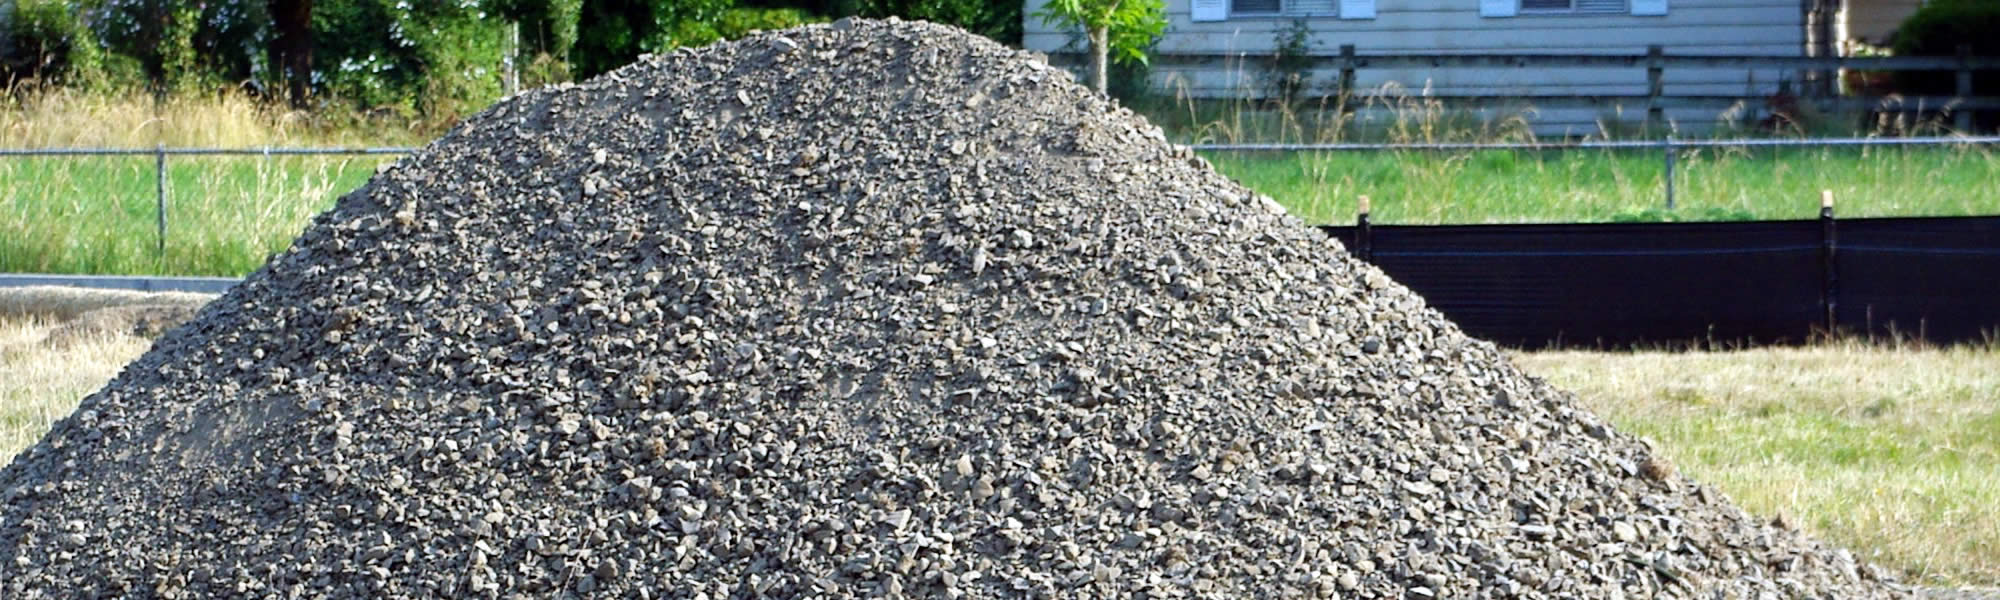 Allouez Gravel and Dirt Delivery Services near me